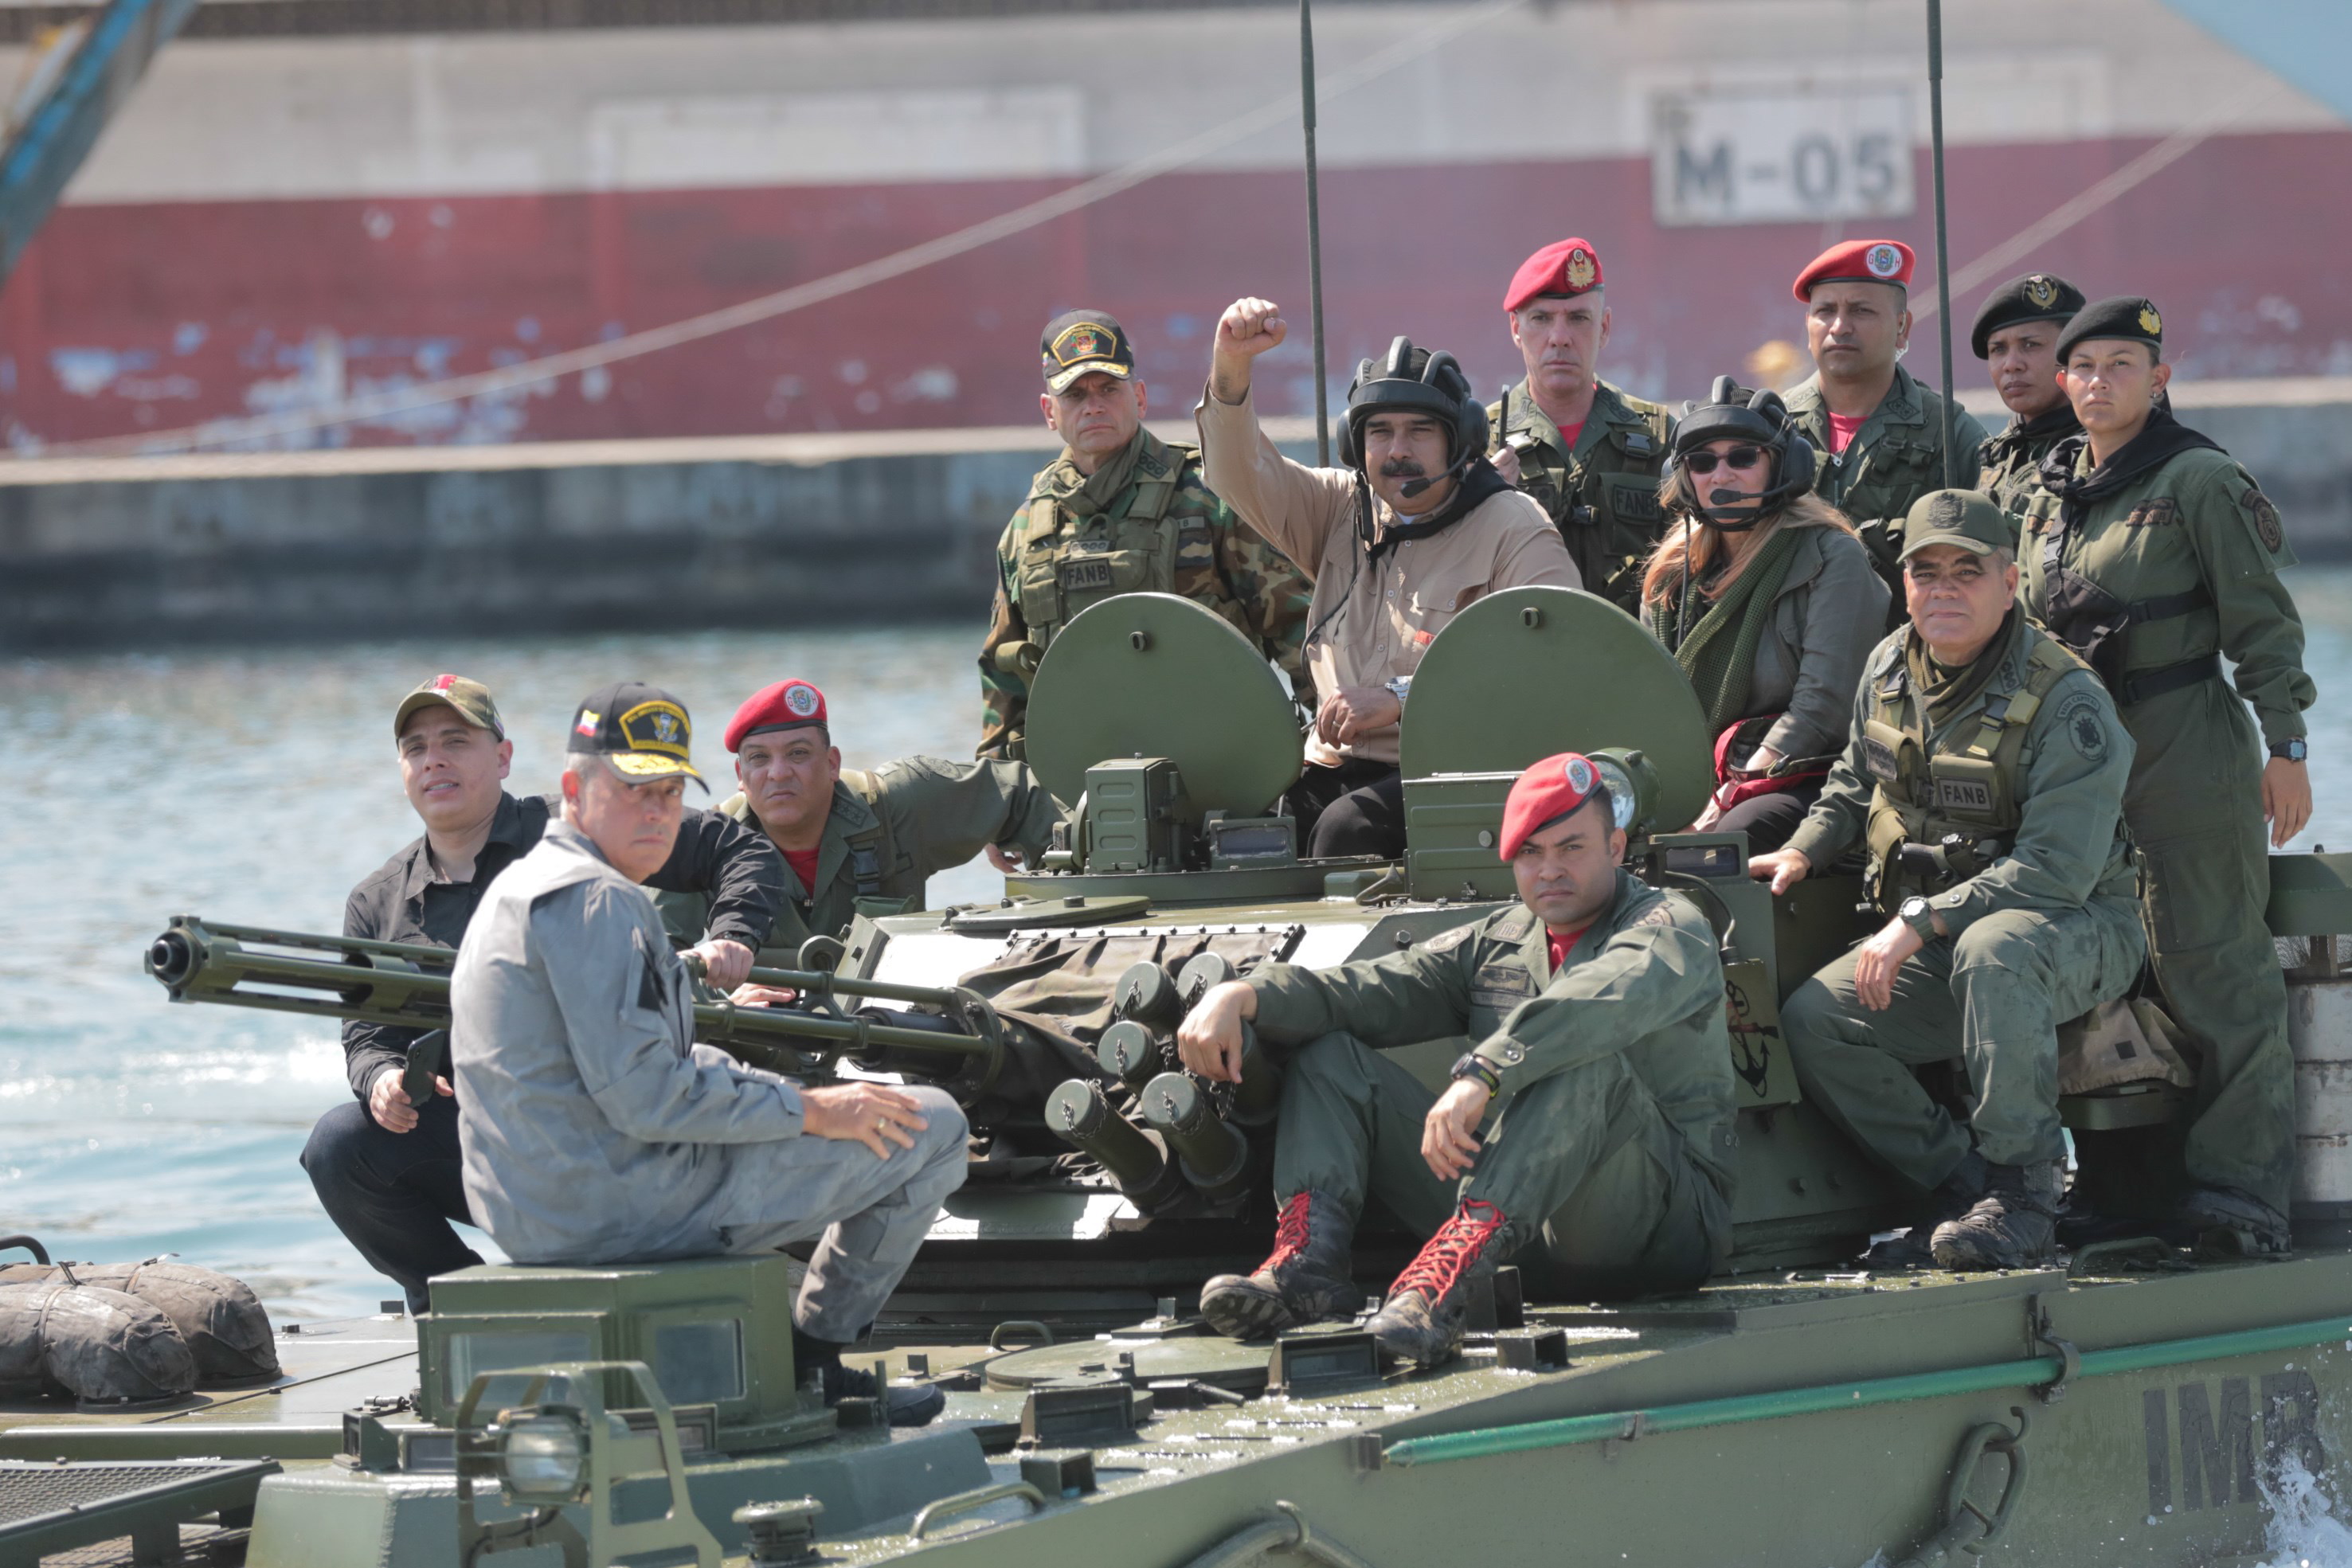 epa07326216 A handout photo made available by the Miraflores Press, shows Venezuelan President Nicolas Maduro (C) as he leads a military exercise, in Caracas, Venezuela, 27 January 2019. Maduro led on Sunday military maneuvers with soldiers, as the opposition went to barracks to deliver to the uniformed of the country the text of a law with which they seek to get them to disown the president.  EPA/MIRAFLORES PRESS / HANDOUT EDITORIAL USE ONLY/NO SALES HANDOUT EDITORIAL USE ONLY/NO SALES